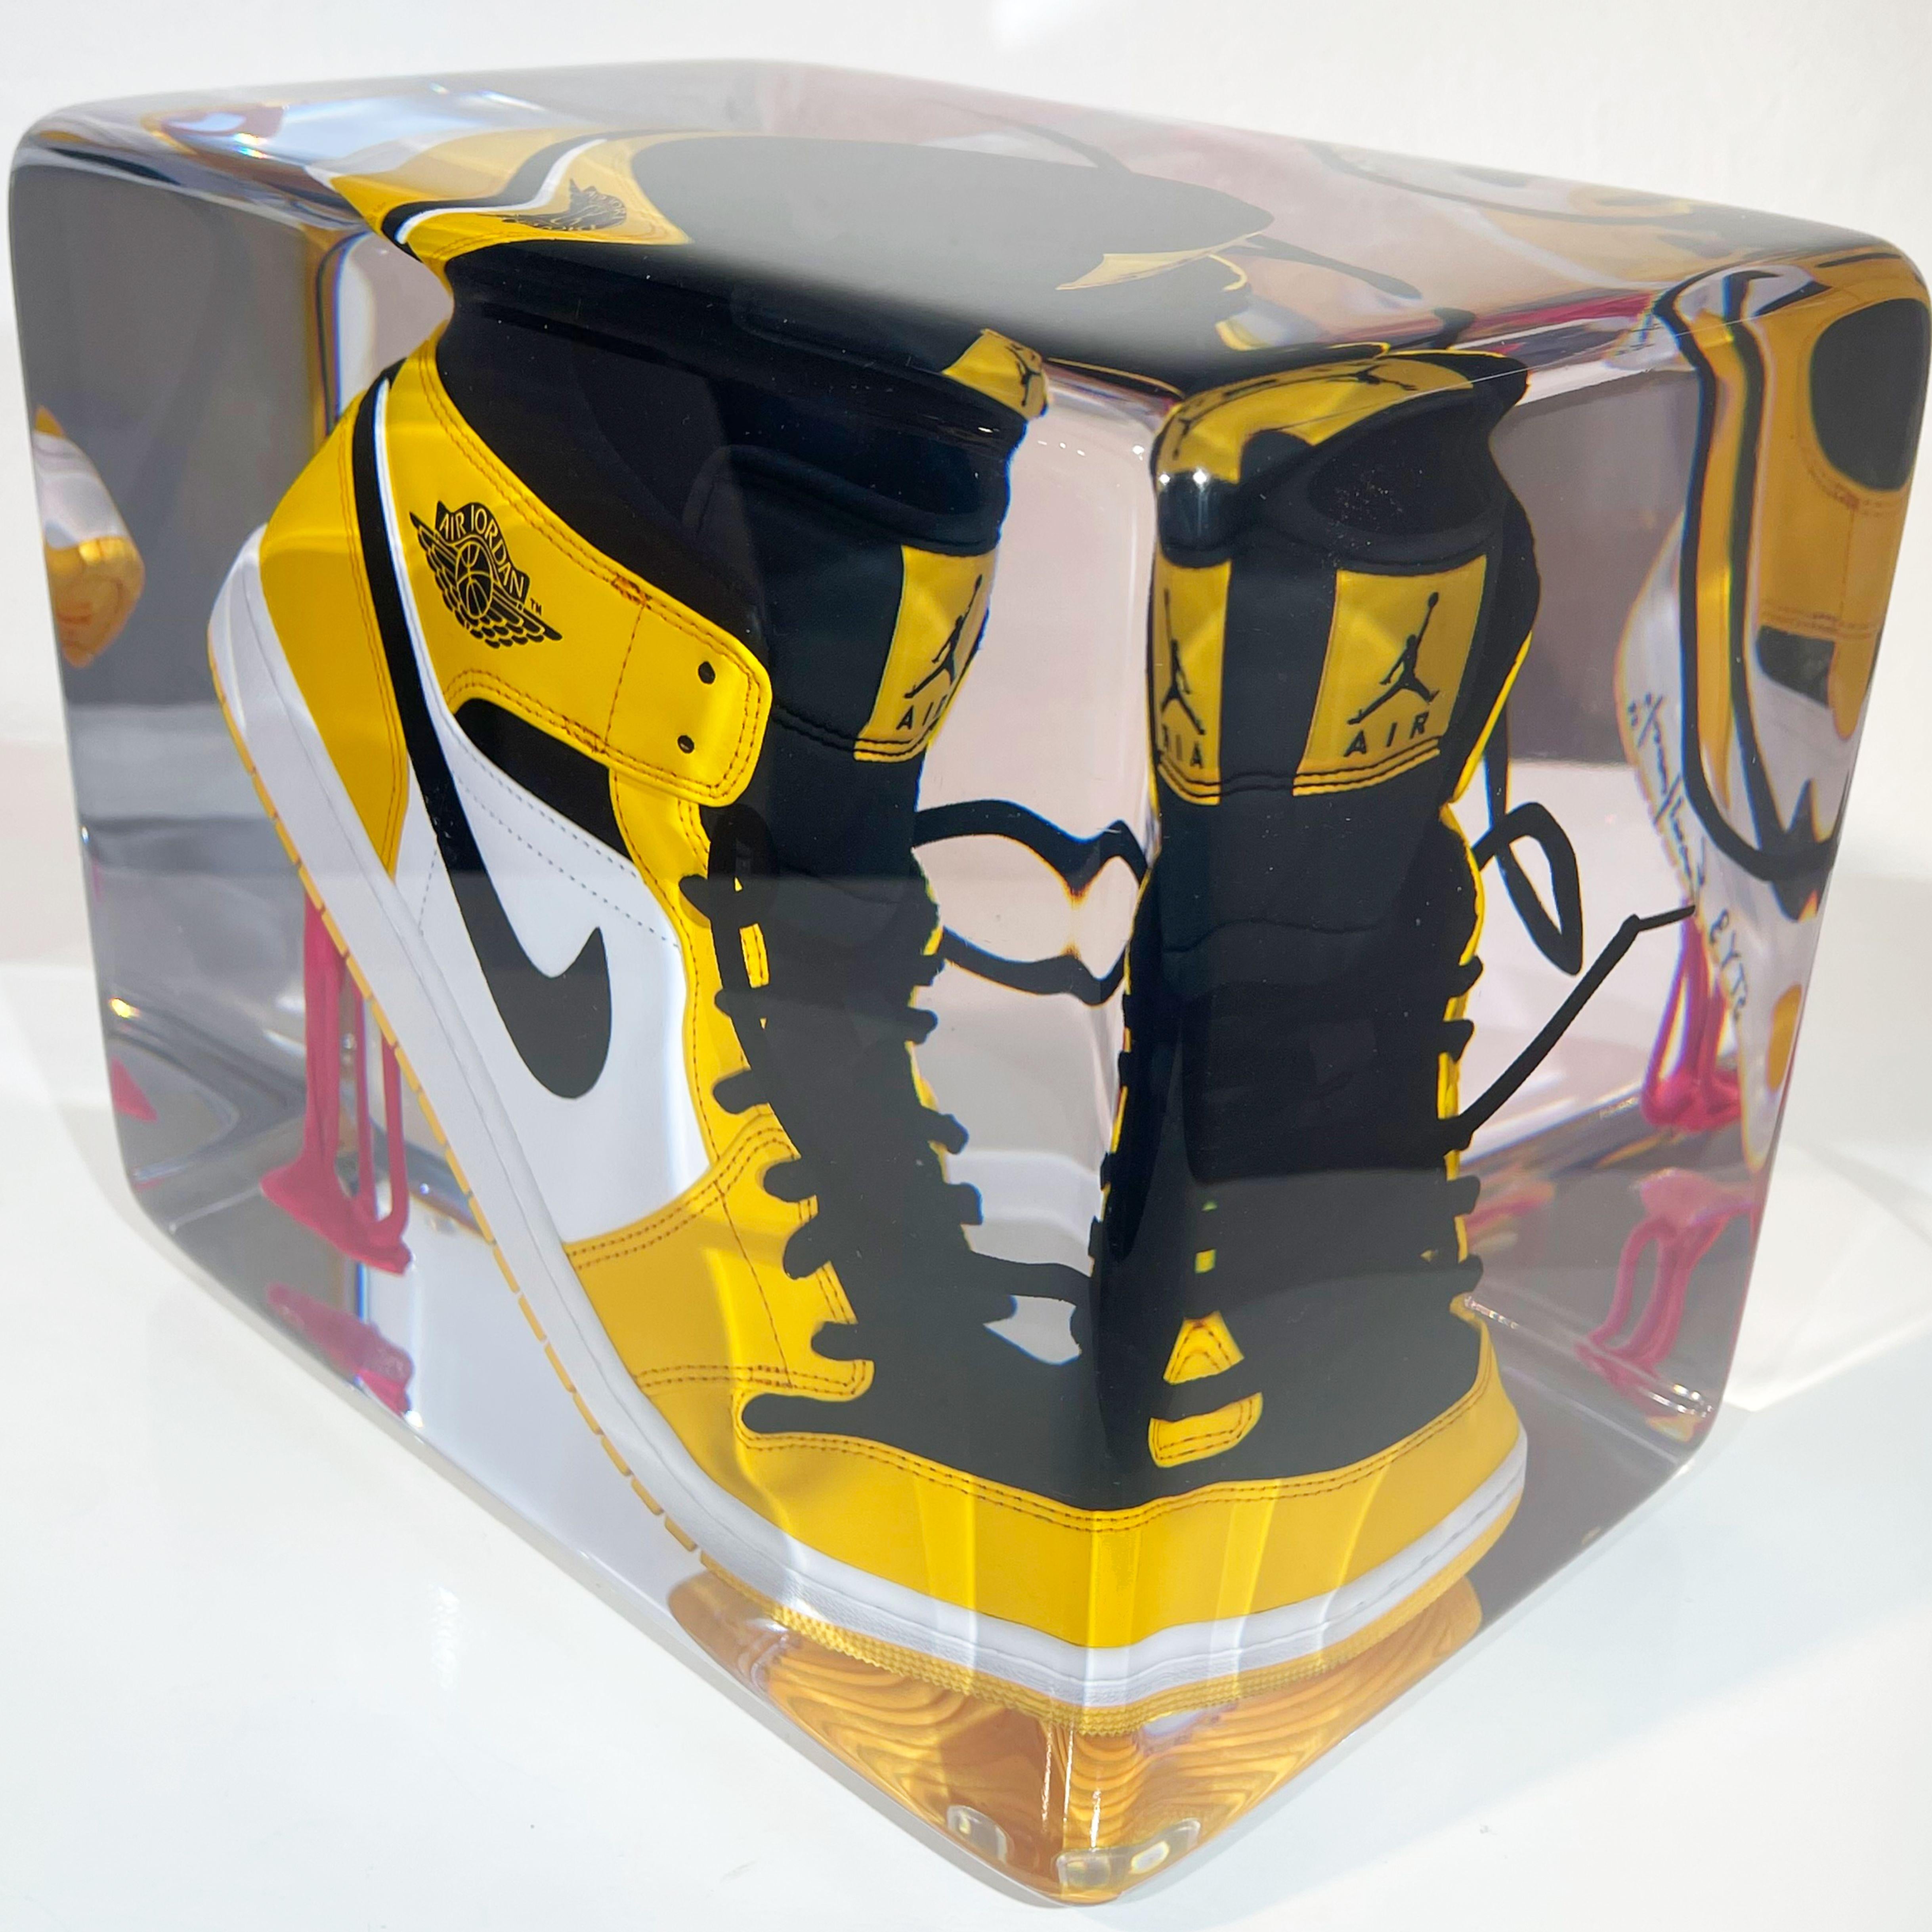 Collection: Perseverancia
Edition: 03/20
Description: Jordan 1 “Taxi Yellow” sneaker with black laces attached to pink
bubblegum, full casted, sanded and polished by hand in transparent
resin.
Size: 20x30cm
Height: 25cm
Weight: 16kg
Year: 2023


The